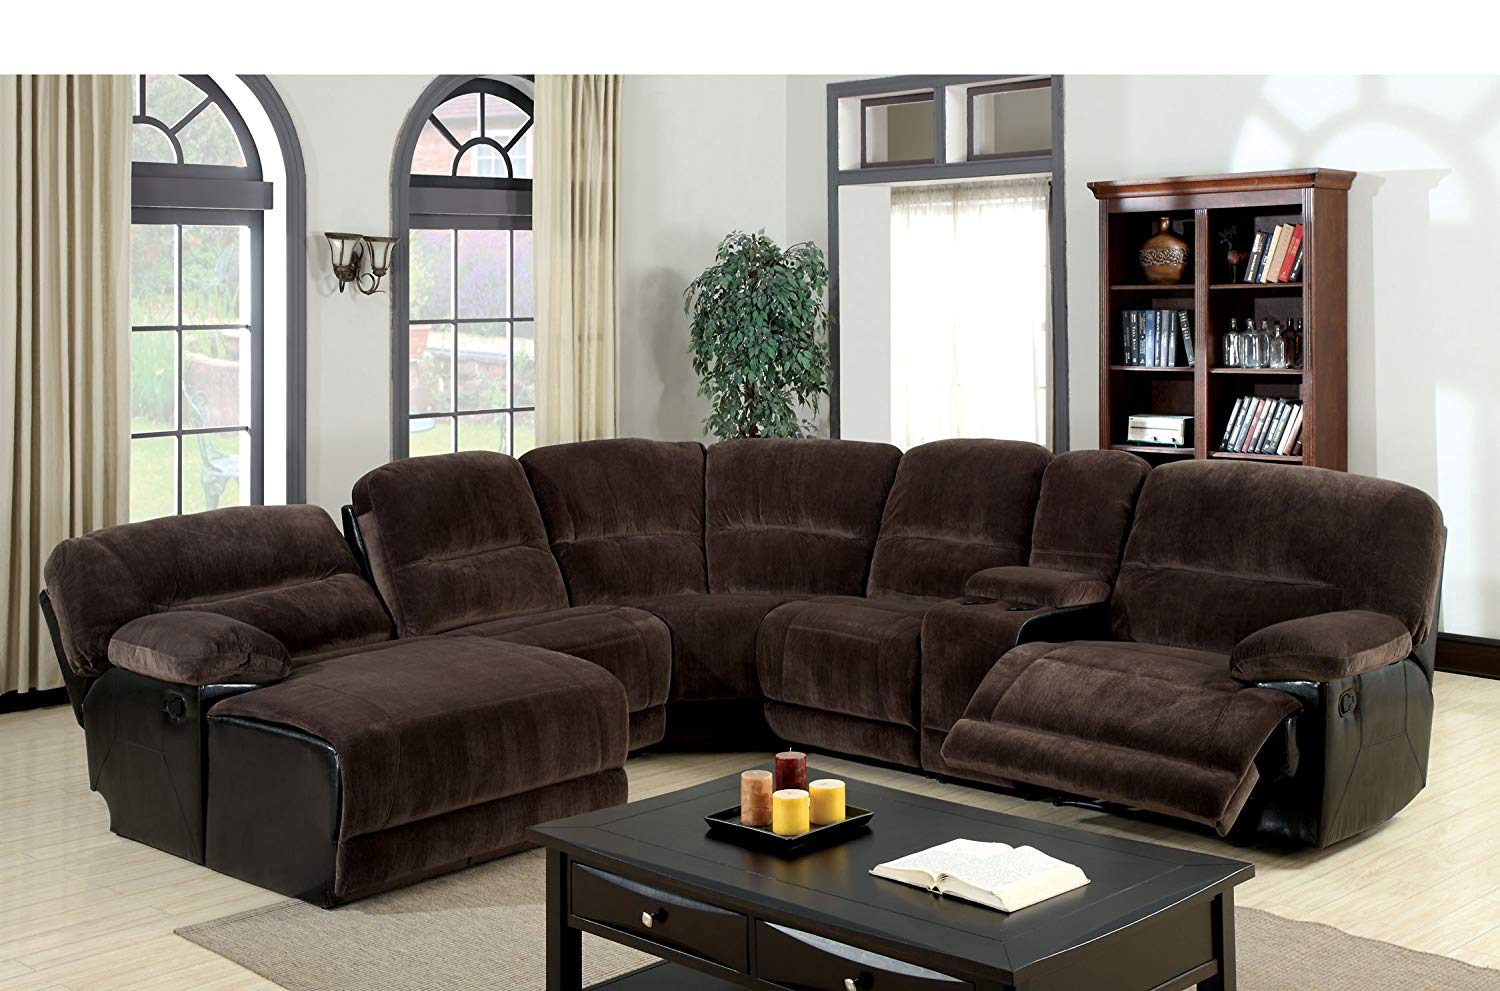 brown sectional sofa amazon.com: furniture of america ladden elephant skin microfiber sectional  sofa with 2 MZCOLJG